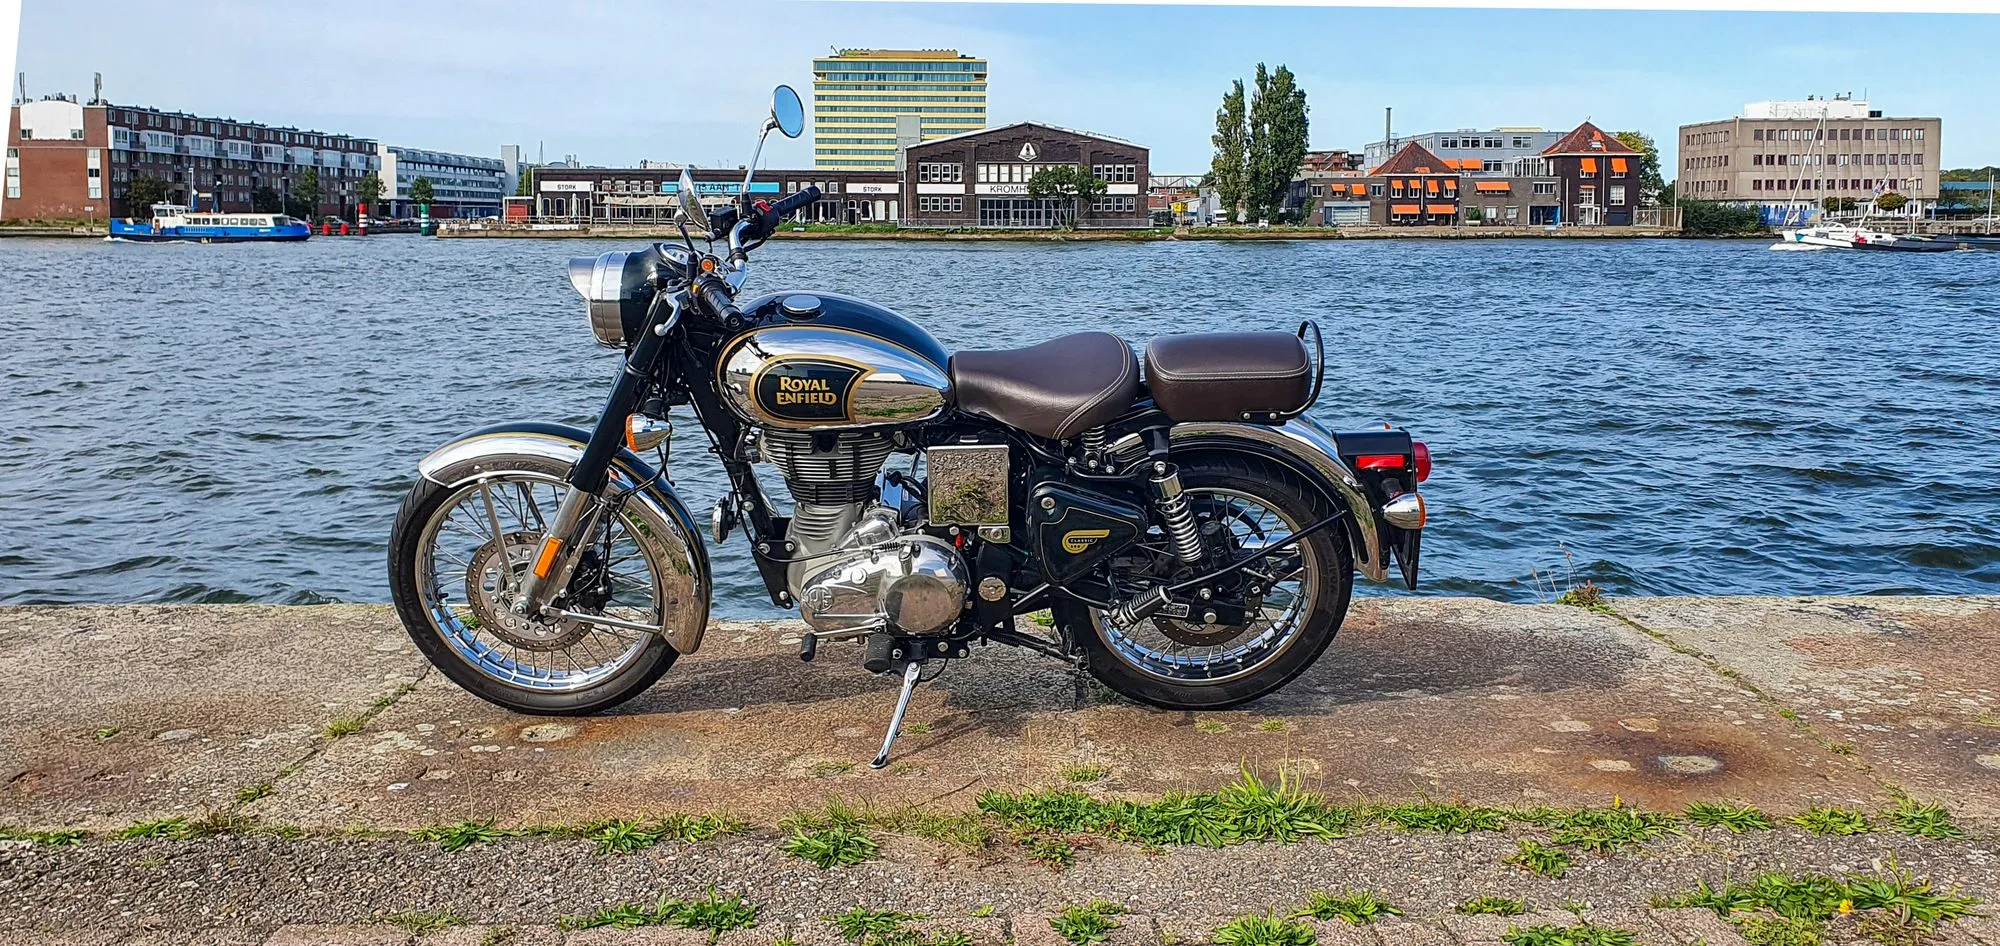 royal enfield classic fhm01